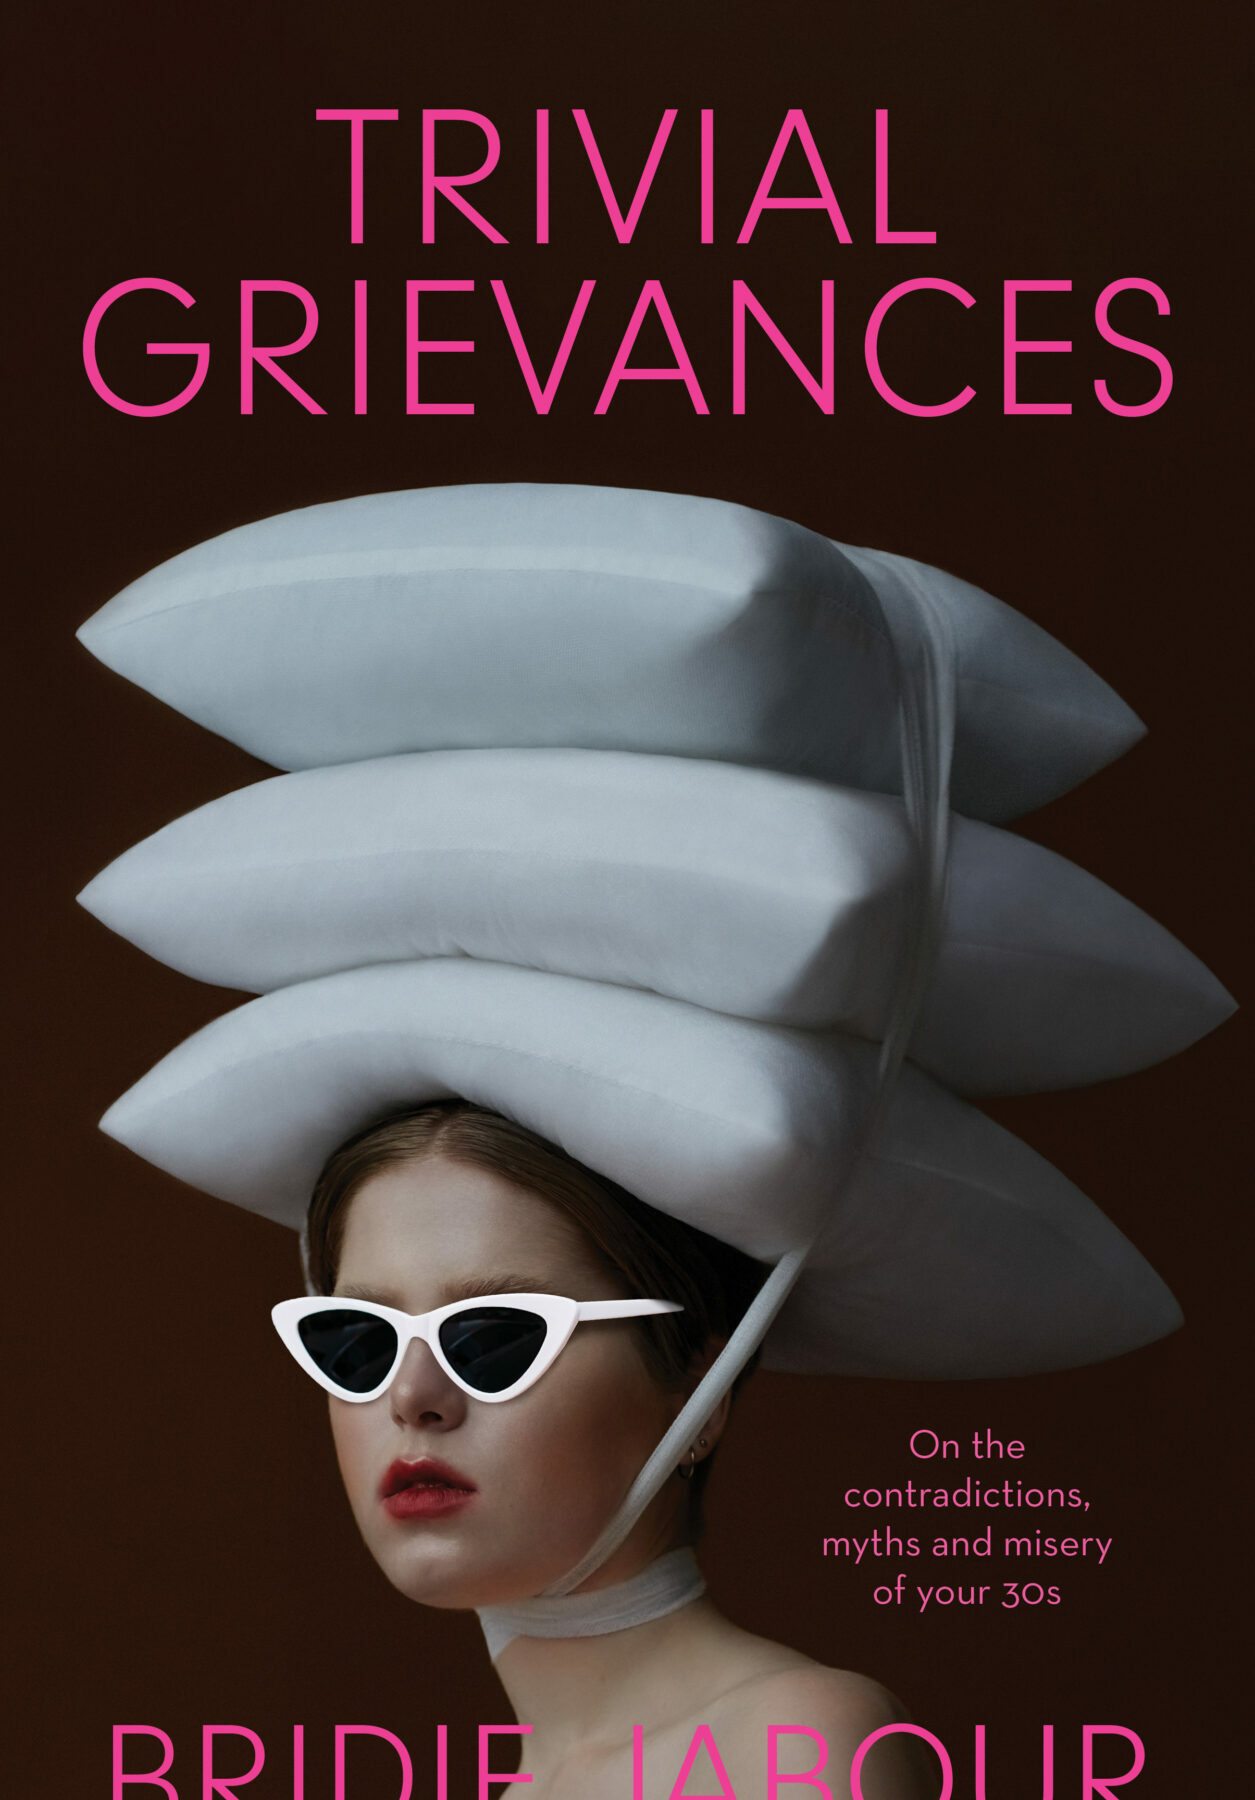 A book cover featuring a photograph of a young woman with white sunglasses and three white pillows tied to the top of her head.